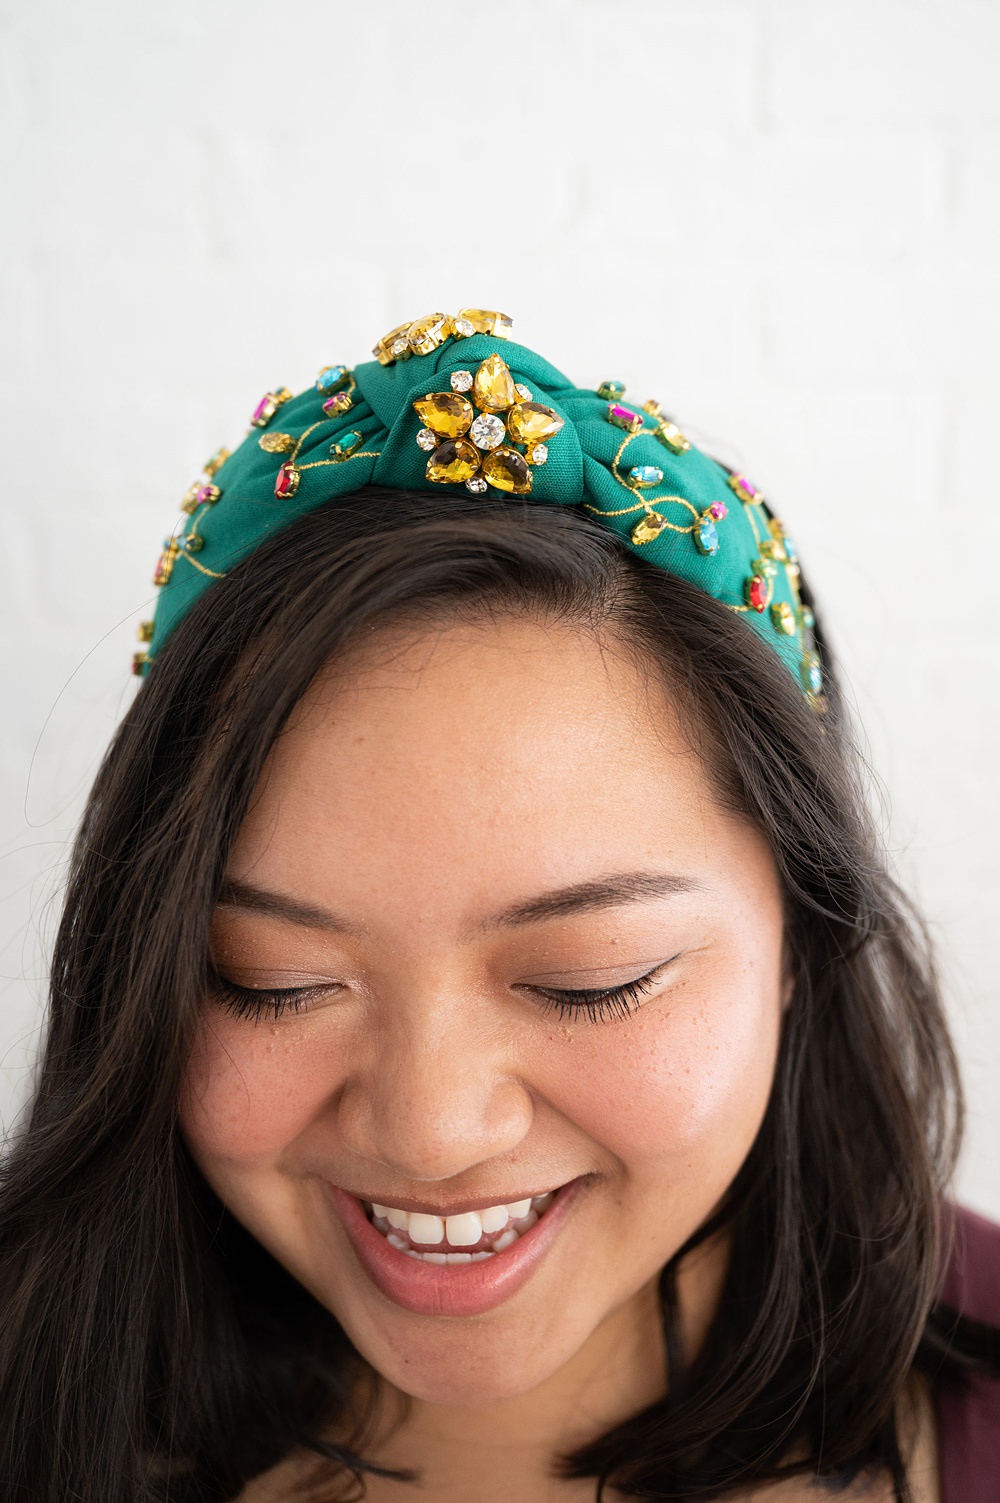 A smiling woman wearing a green headband. She's looking downwards.